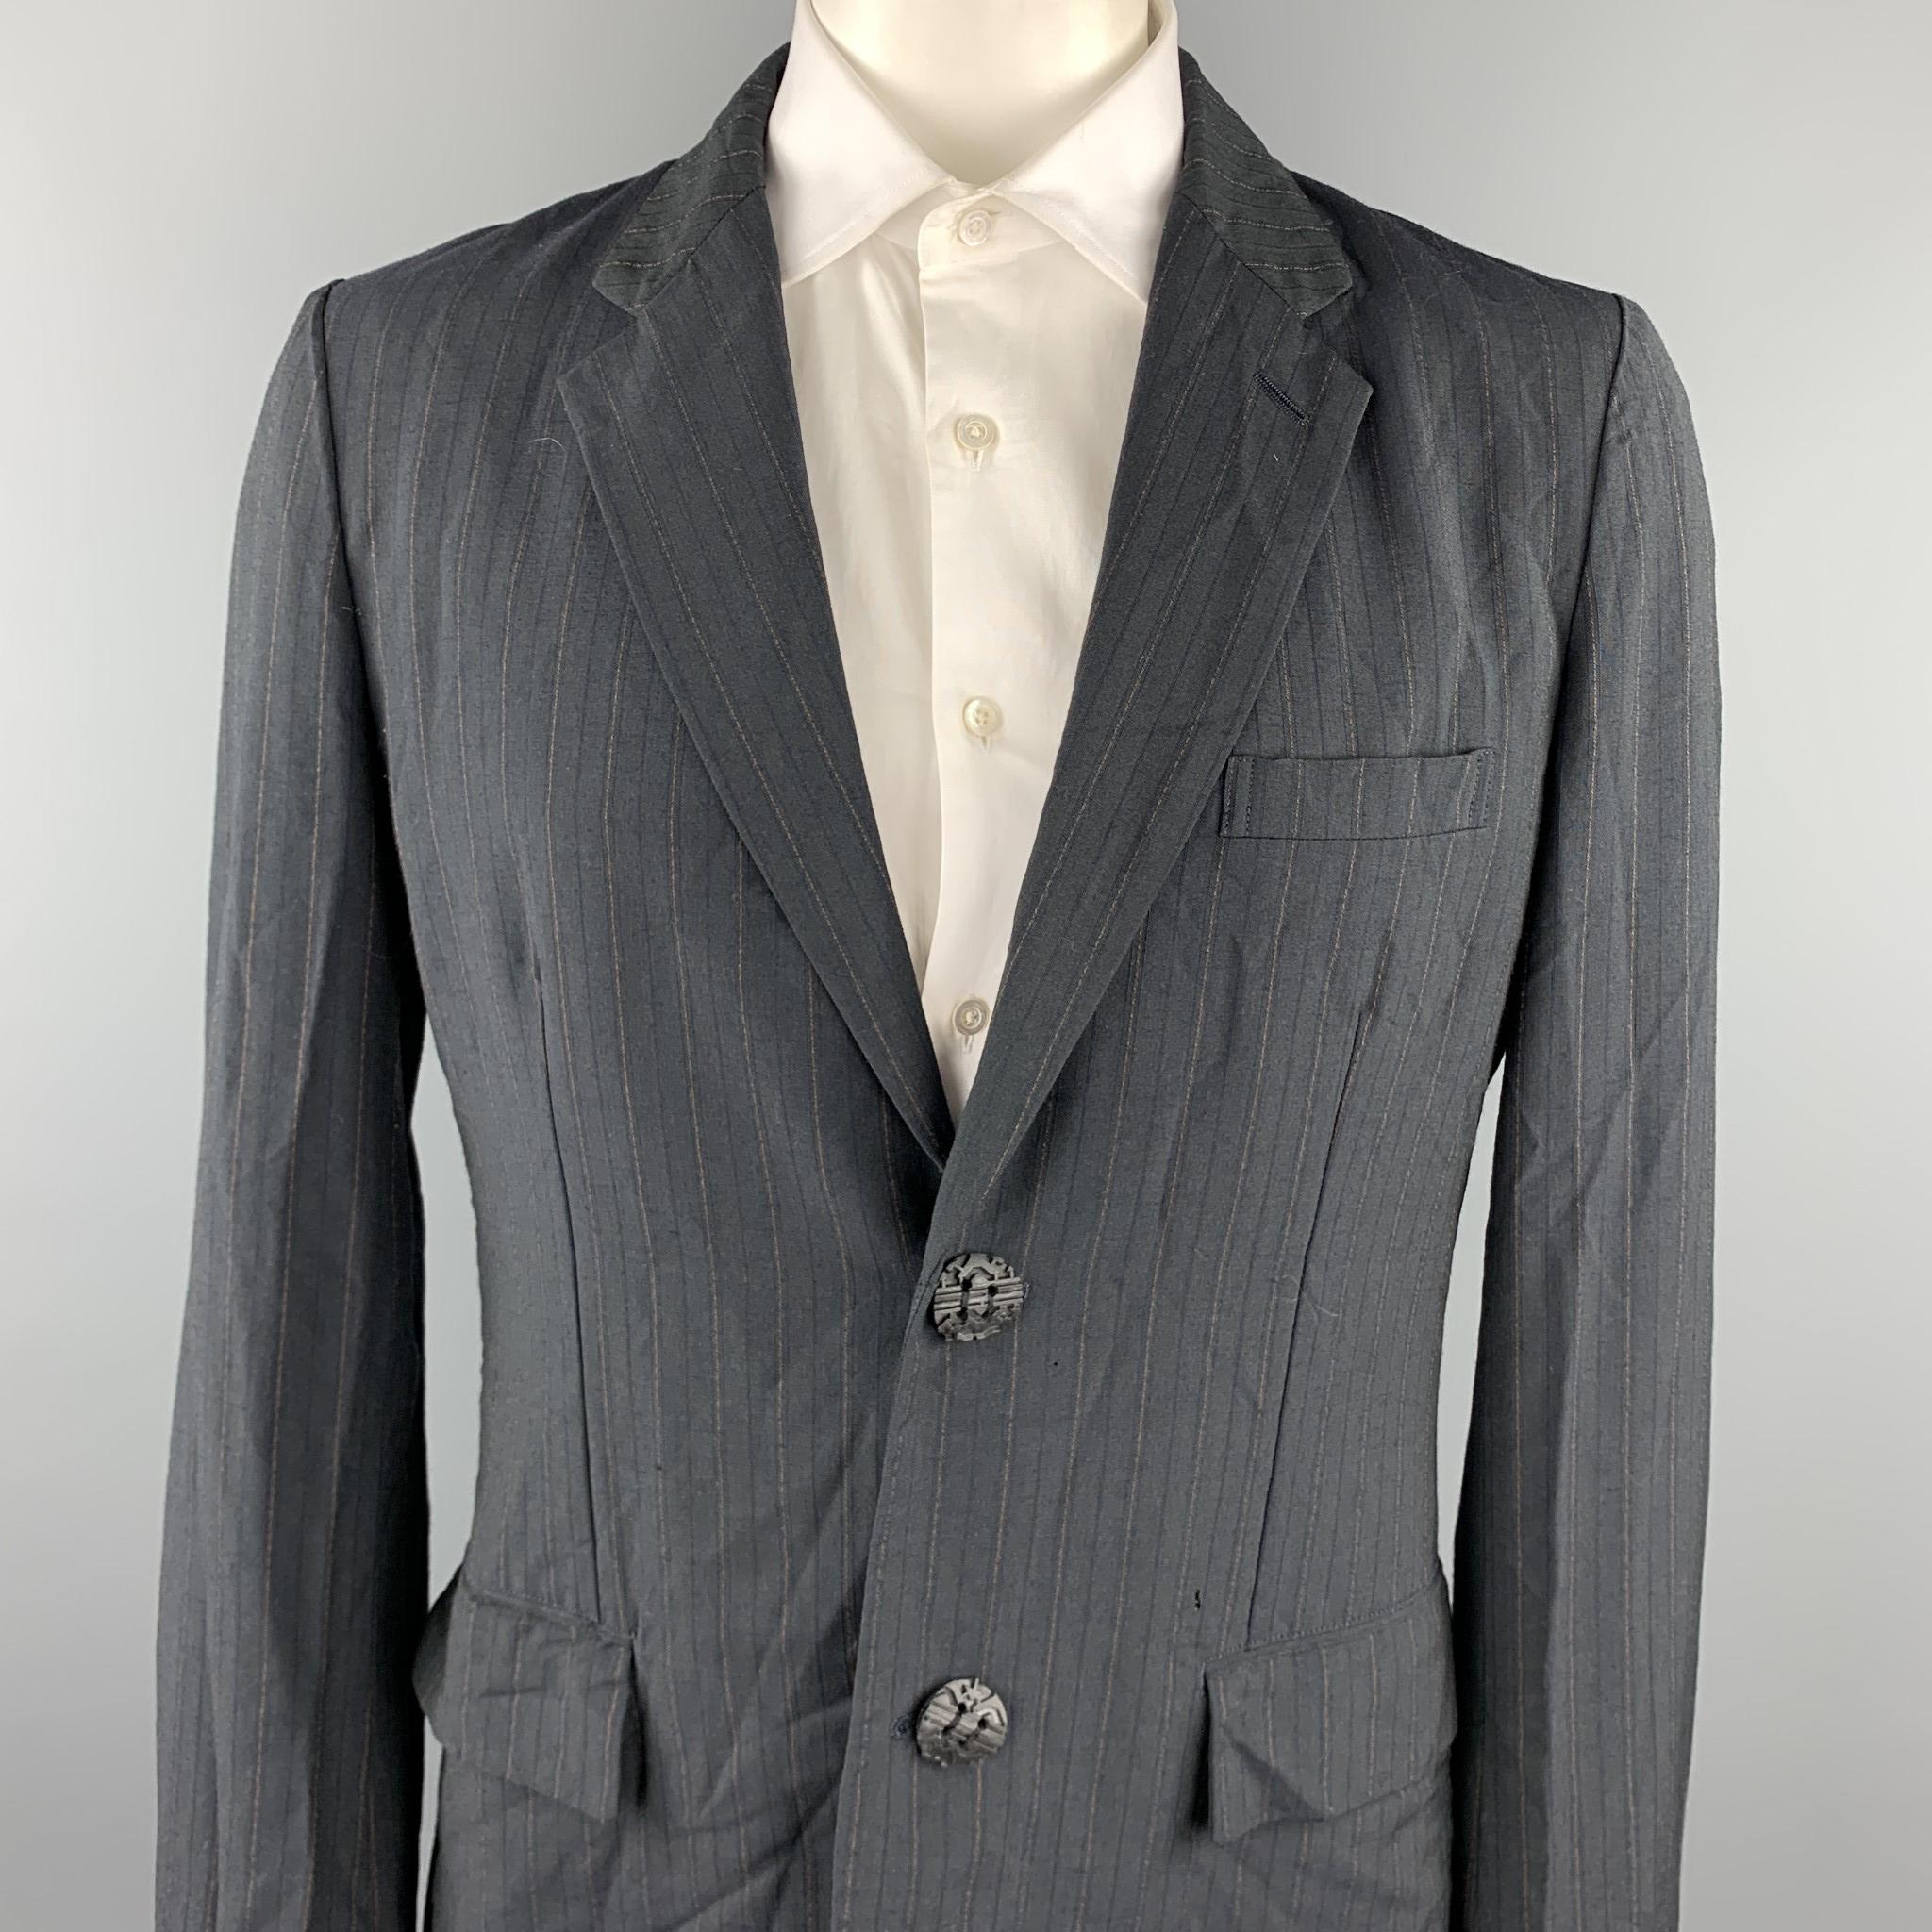 COMME des GARCONS HOMME PLUS sport coat comes in a slate vertical stripe wool blend with a half liner featuring a notch lapel, flap pockets, and a two button closure. Made in Japan.

Good Pre-Owned Condition.
Marked: XL / AD